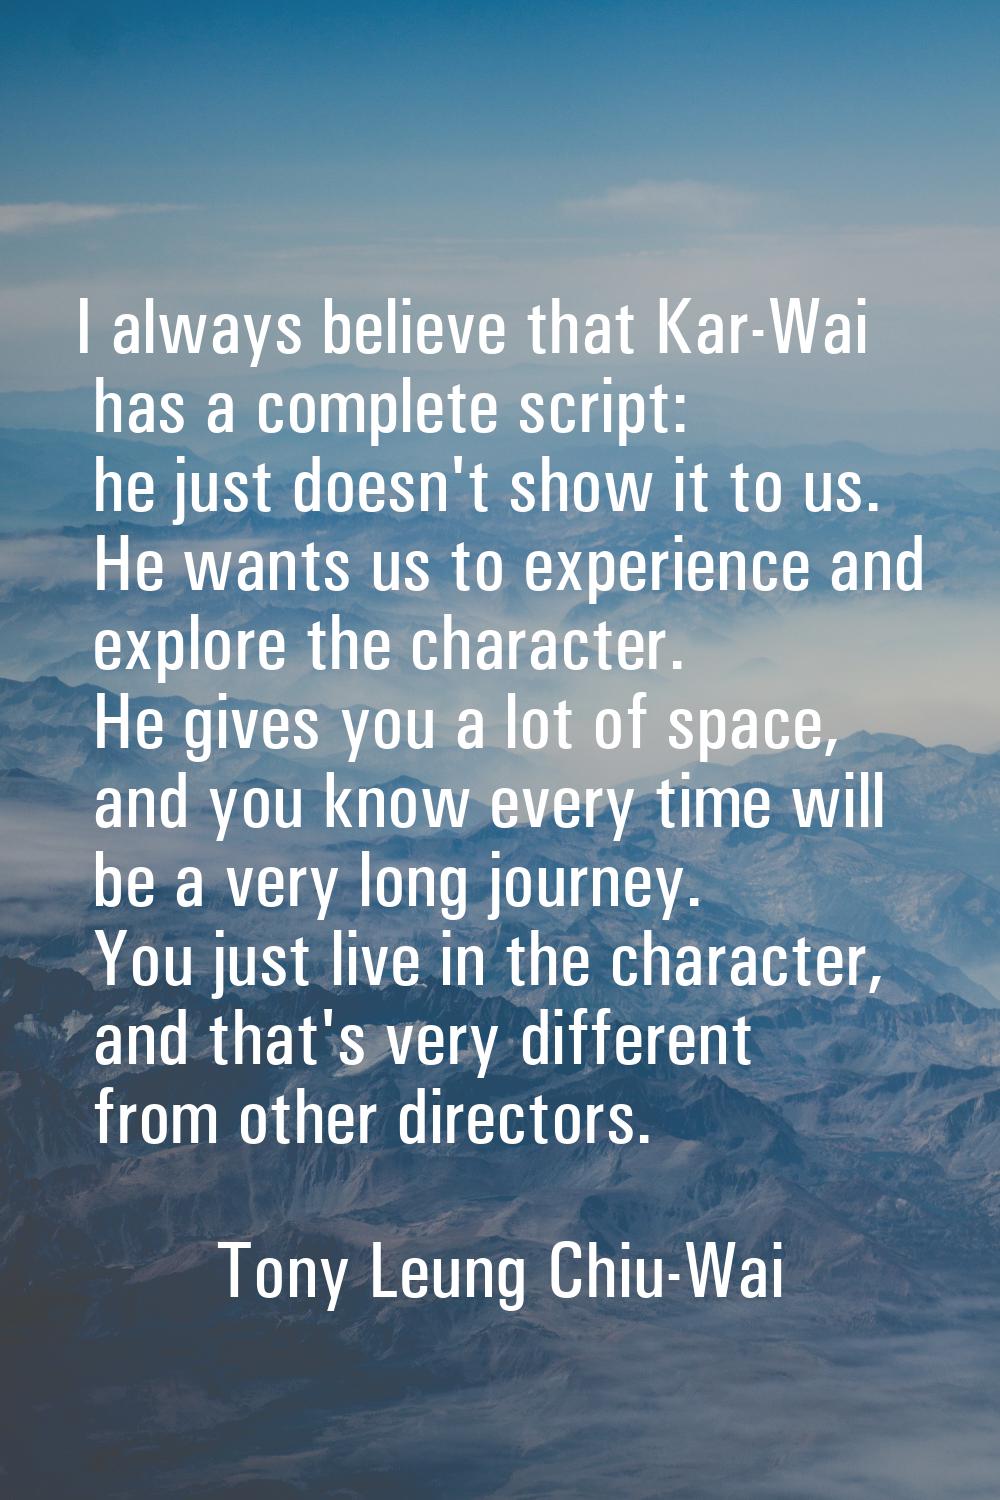 I always believe that Kar-Wai has a complete script: he just doesn't show it to us. He wants us to 